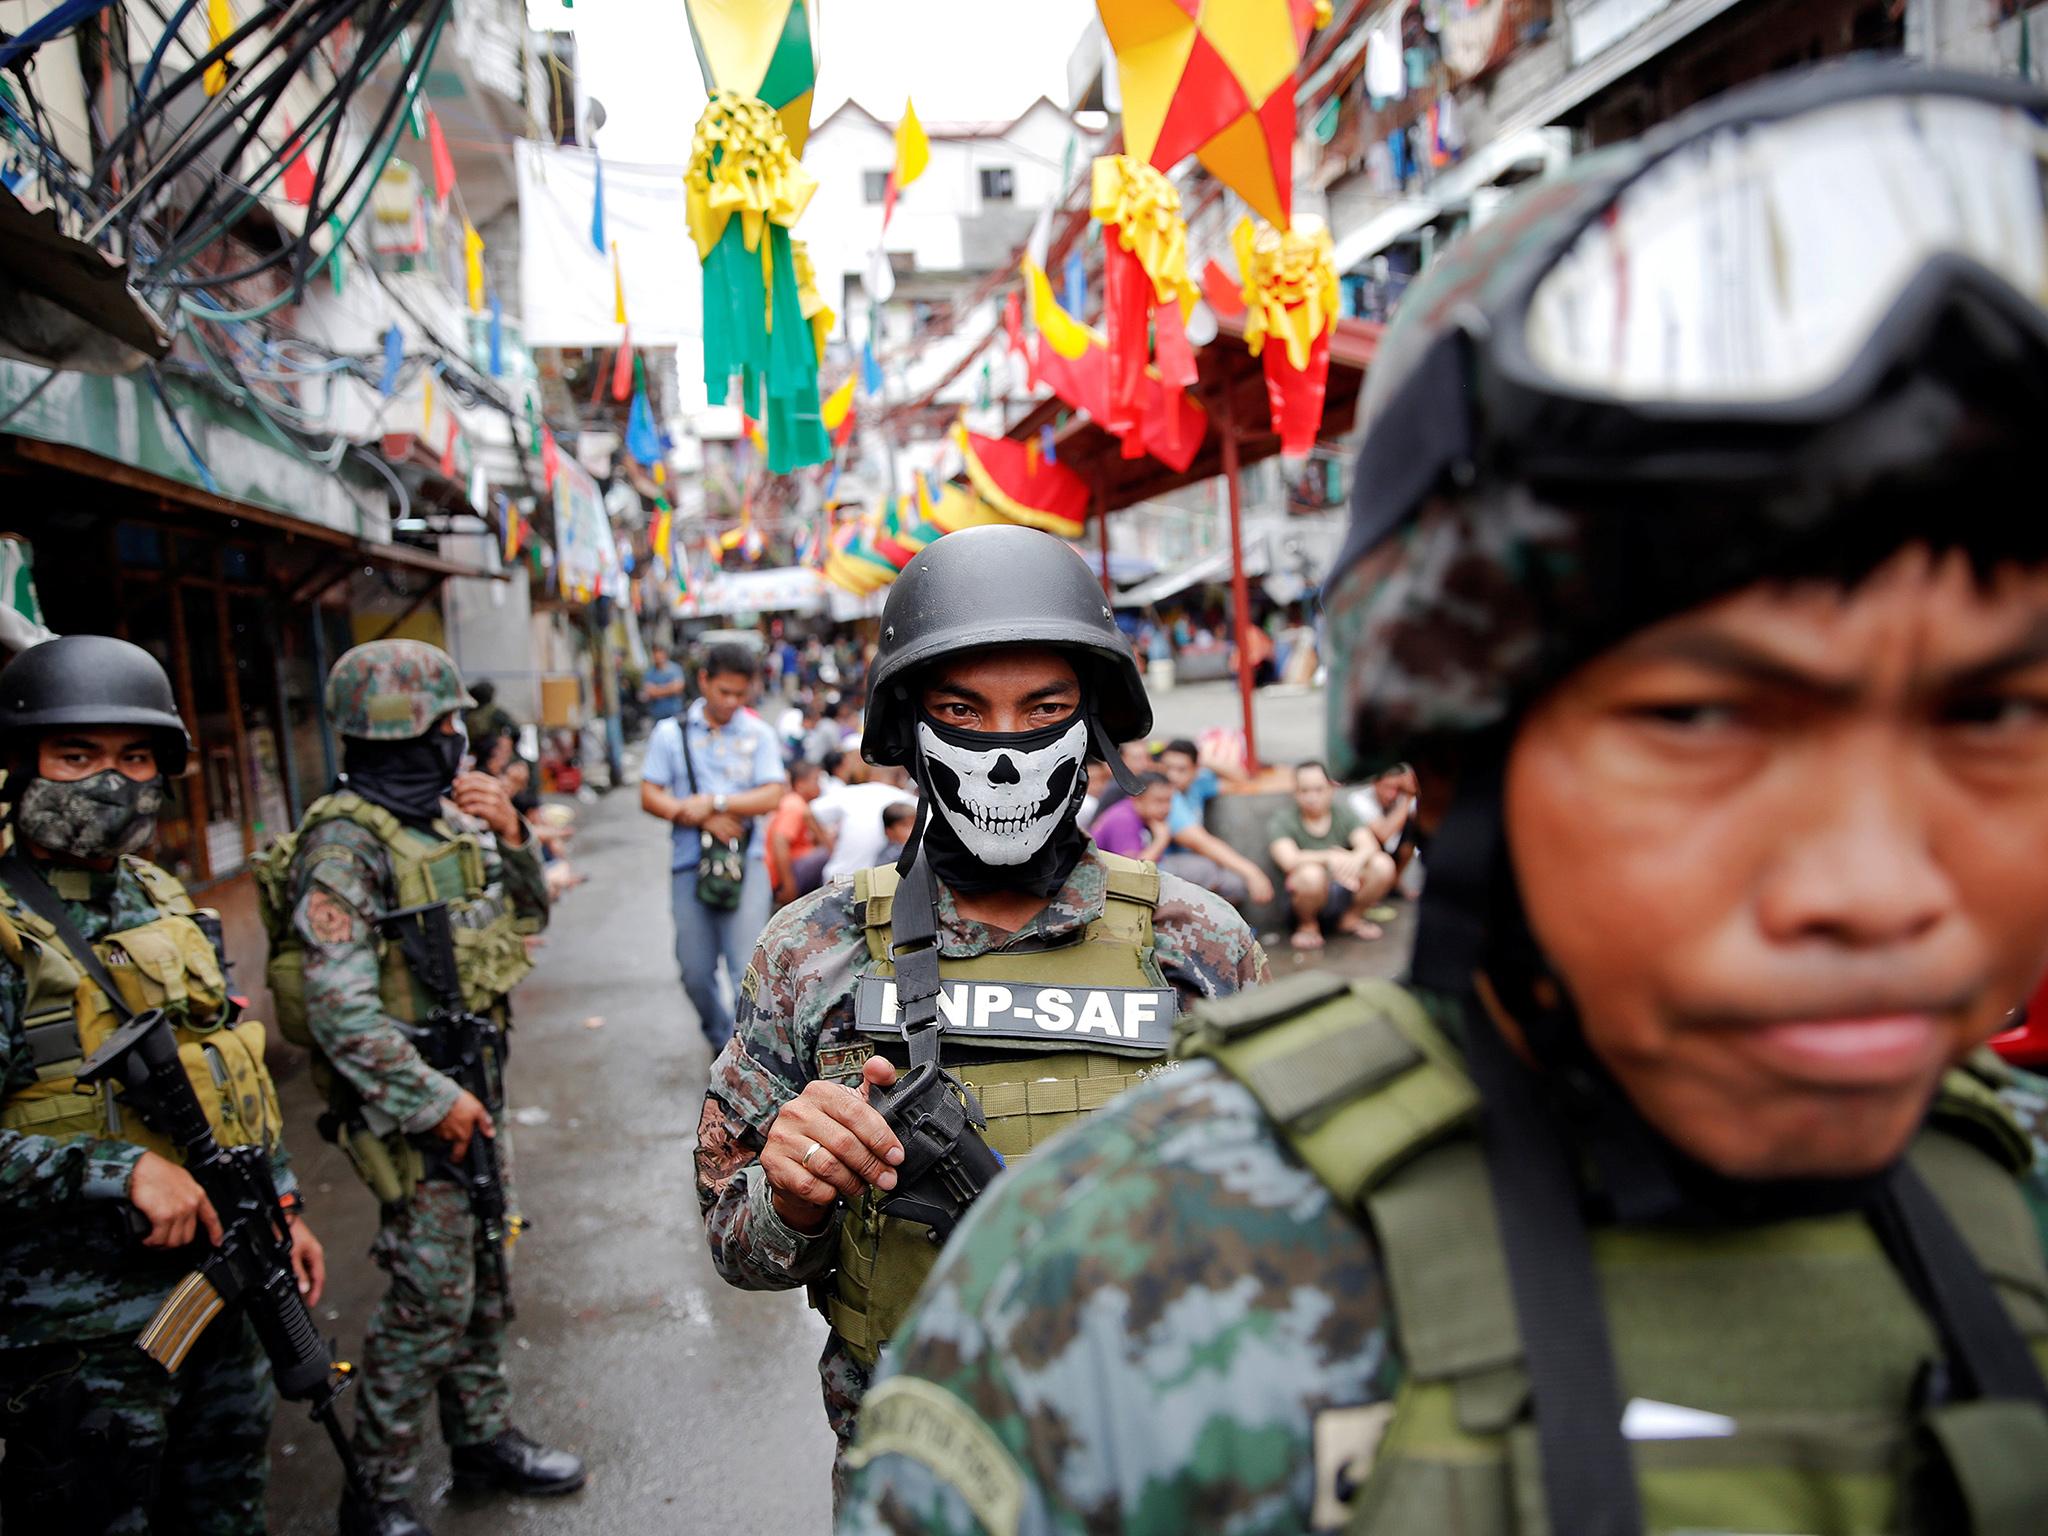 Armed security forces take a part in a drug raid, in Manila